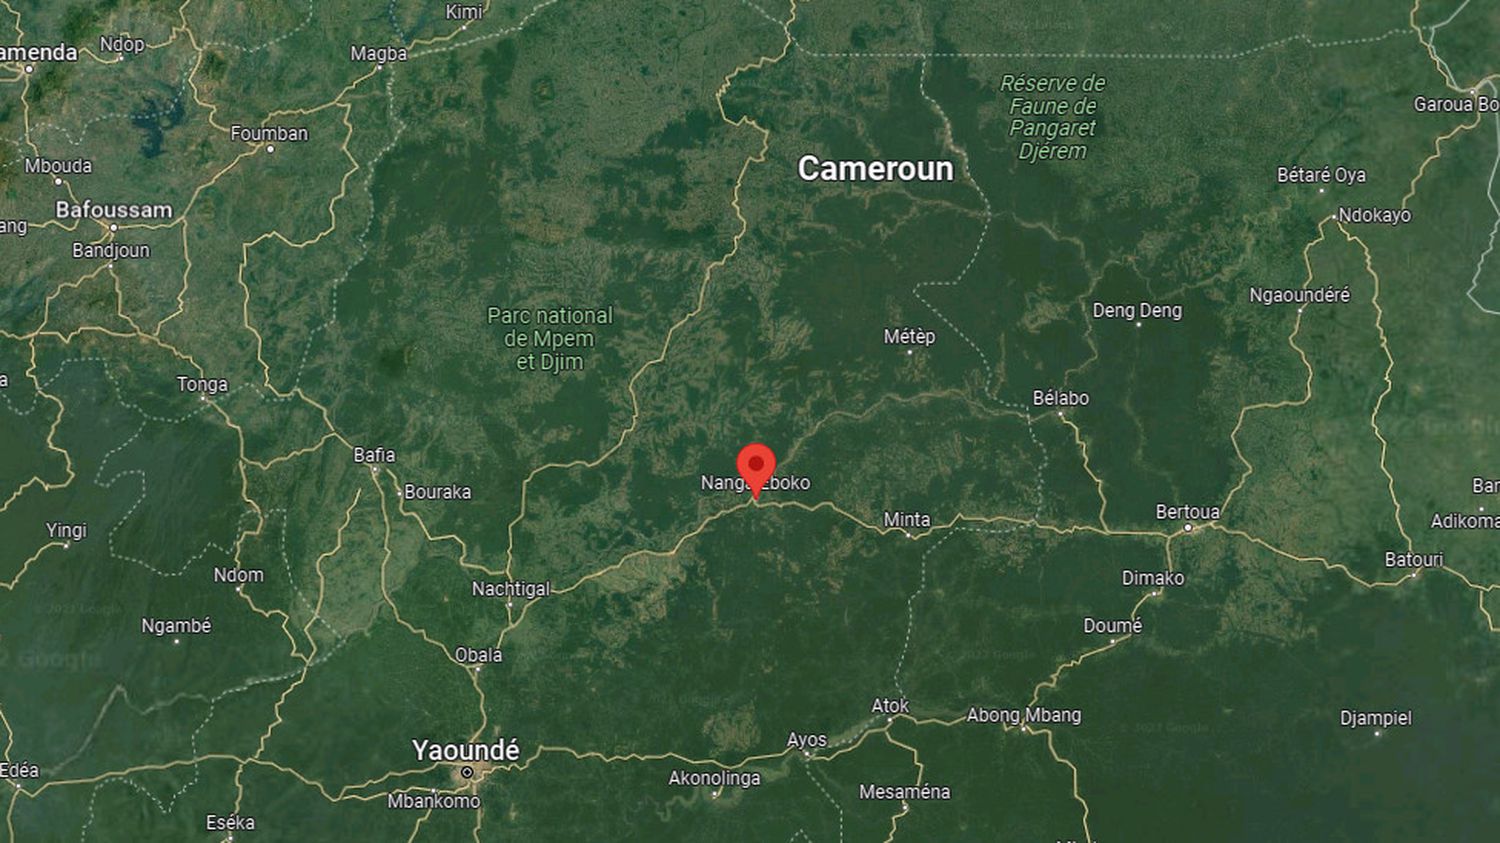 Cameroon: plane crashes in forest with 11 people on board
